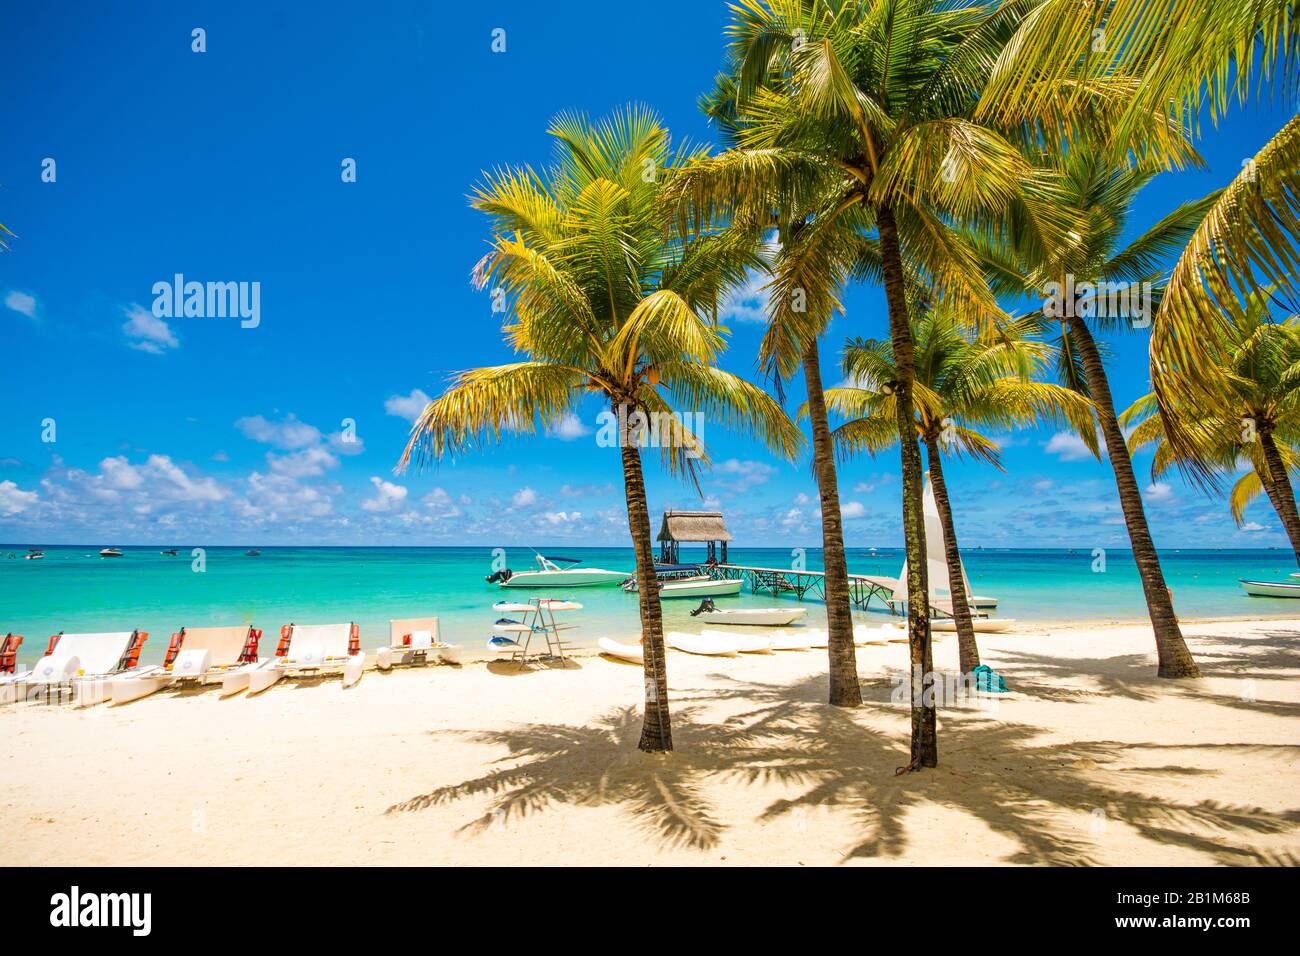 Trou aux biches Mauritius.Tropical exotic beach with palm trees and clear blue water. Stock Photo